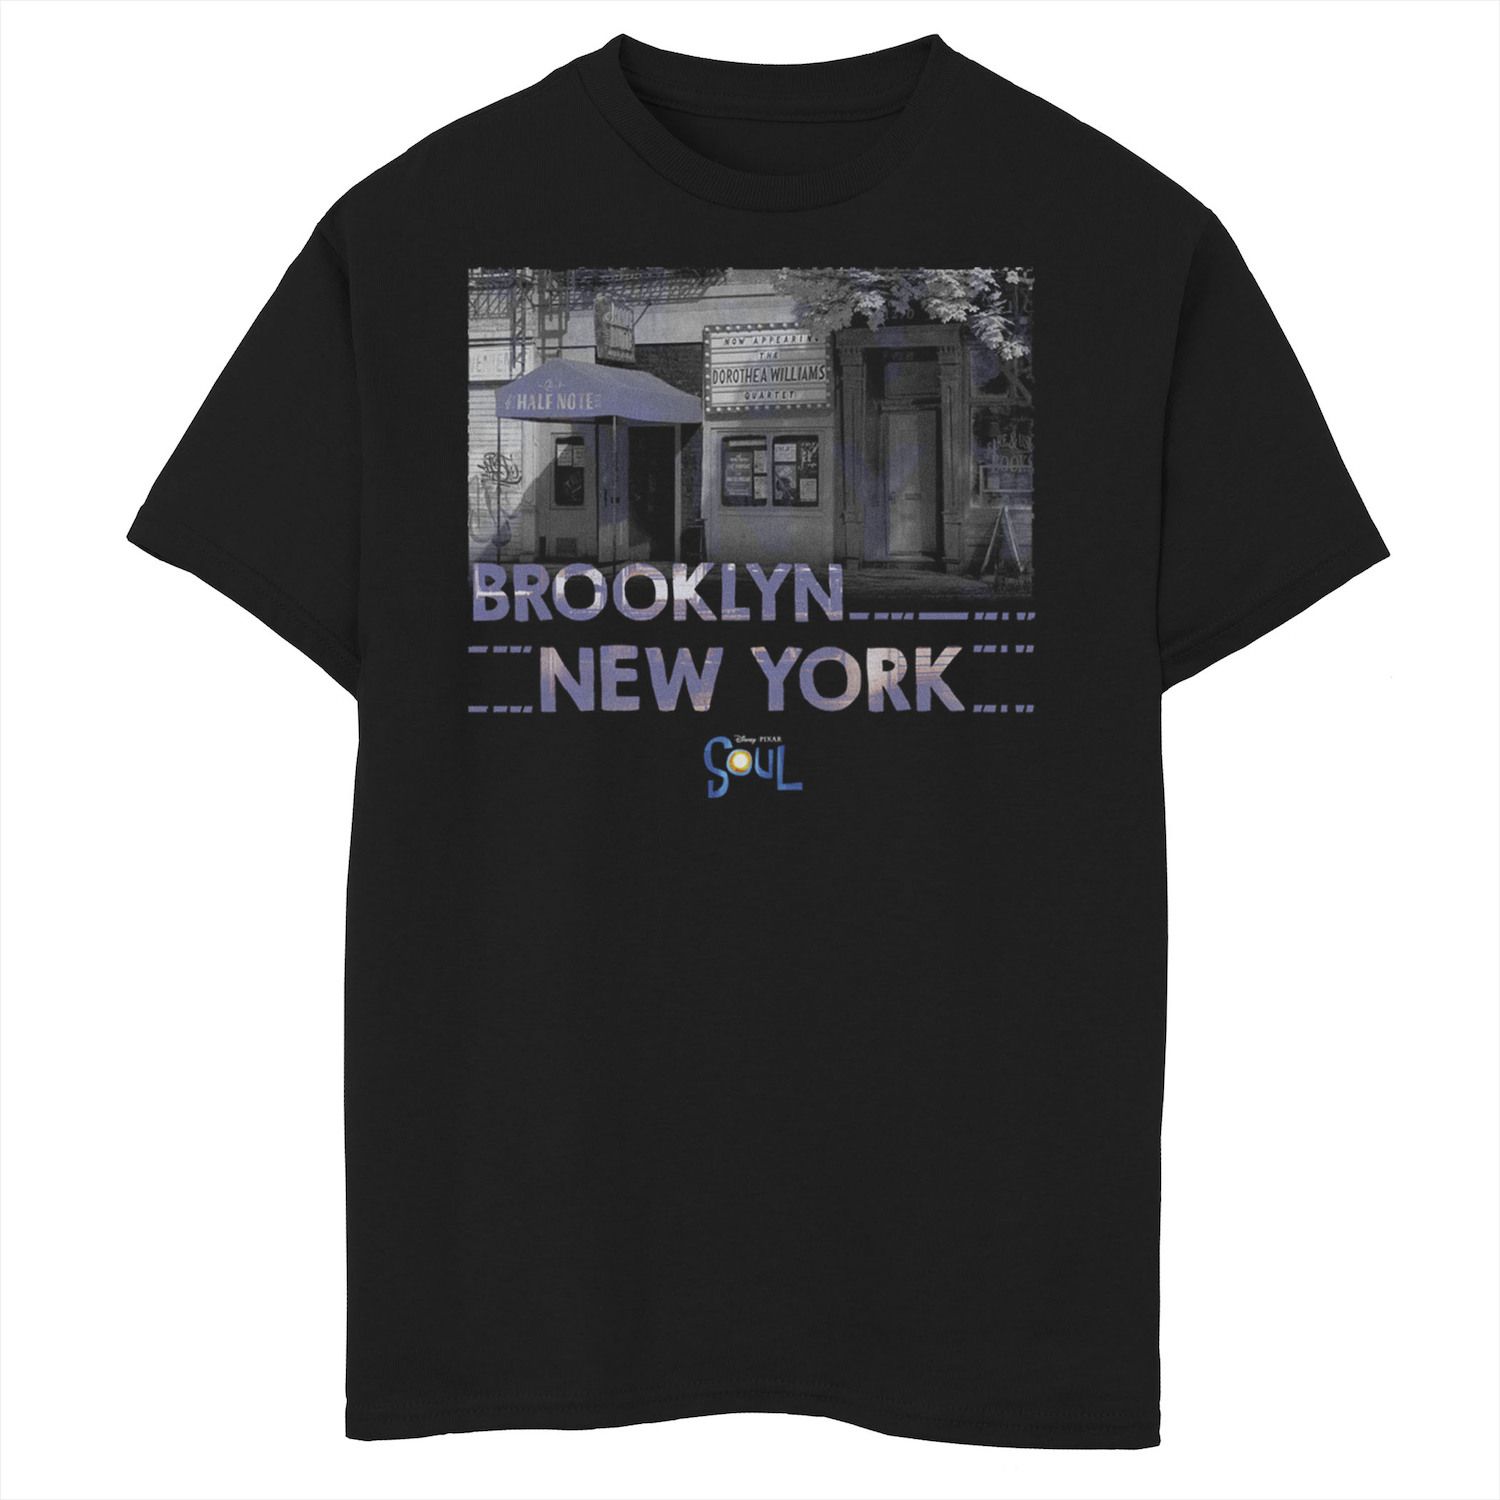 Image for Disney / Pixar 's Soul Boys 8-20 Brooklyn New York The Half Note Portrait Graphic Tee at Kohl's.